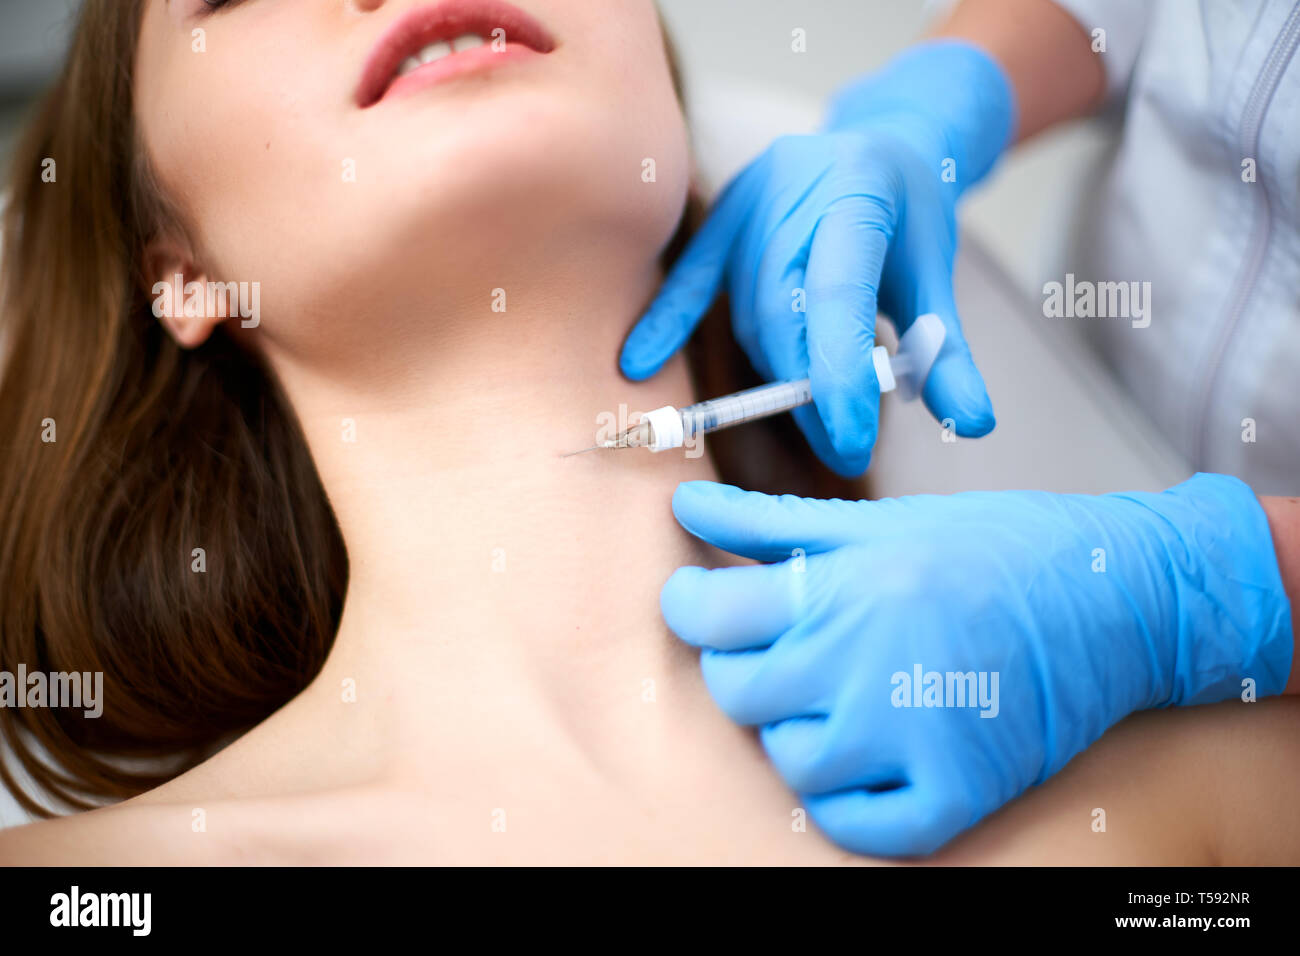 Beautician doctor with botulinum toxin syringe making injection to platysmal bands. Neck rejuvenation mesotherapy. Anti-aging treatment and face lift Stock Photo